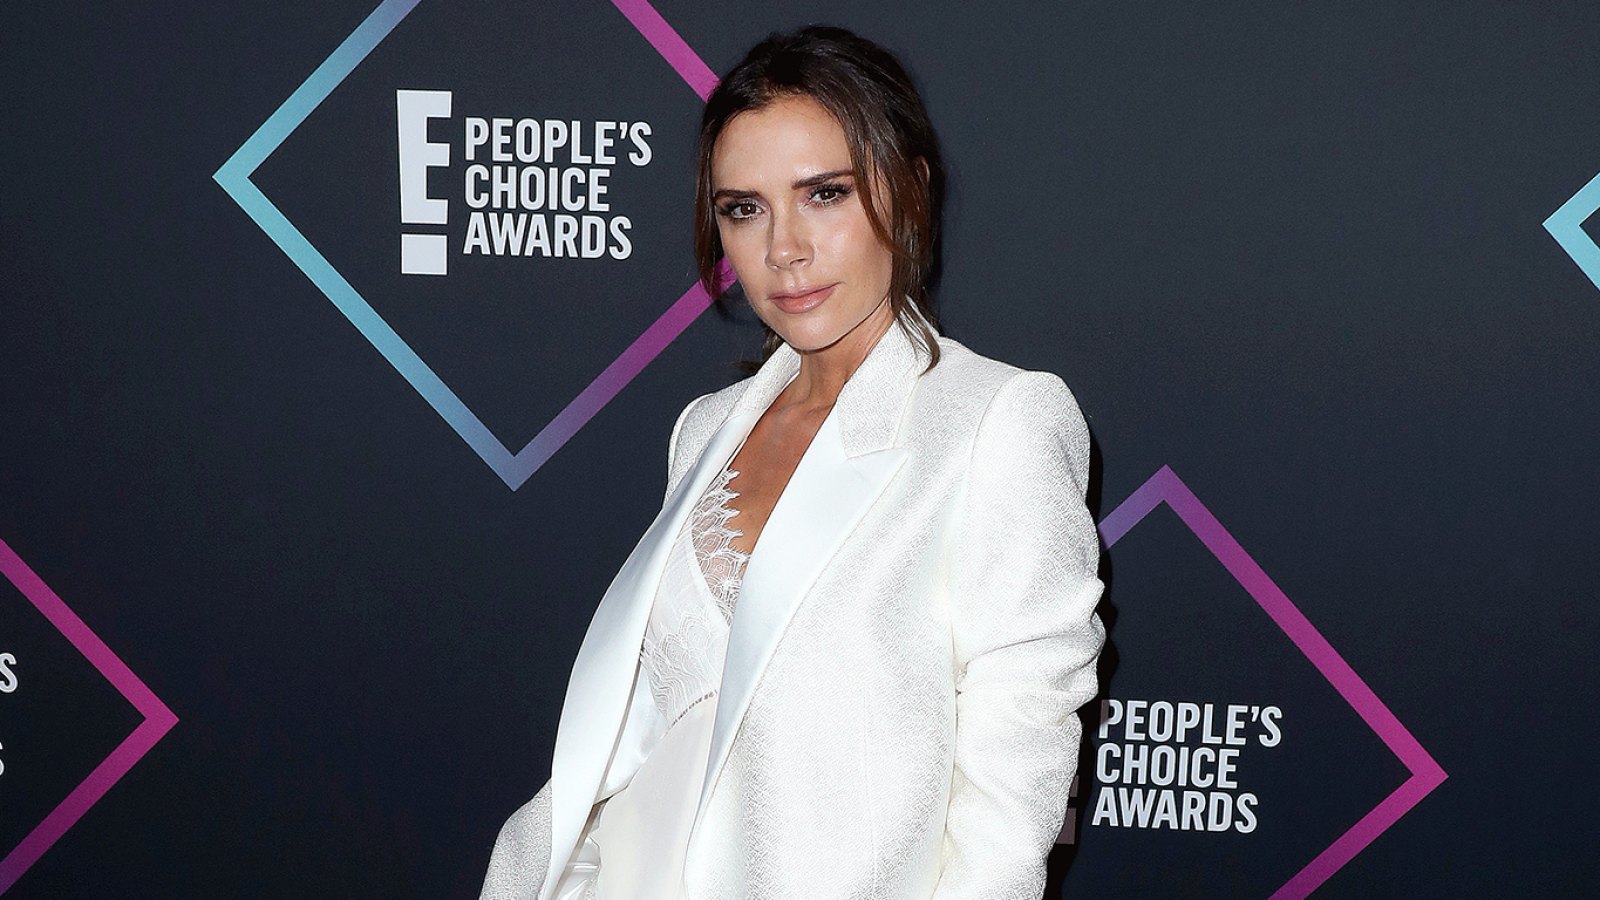 Victoria Beckham Says Being Really Skinny Is Old-Fashioned